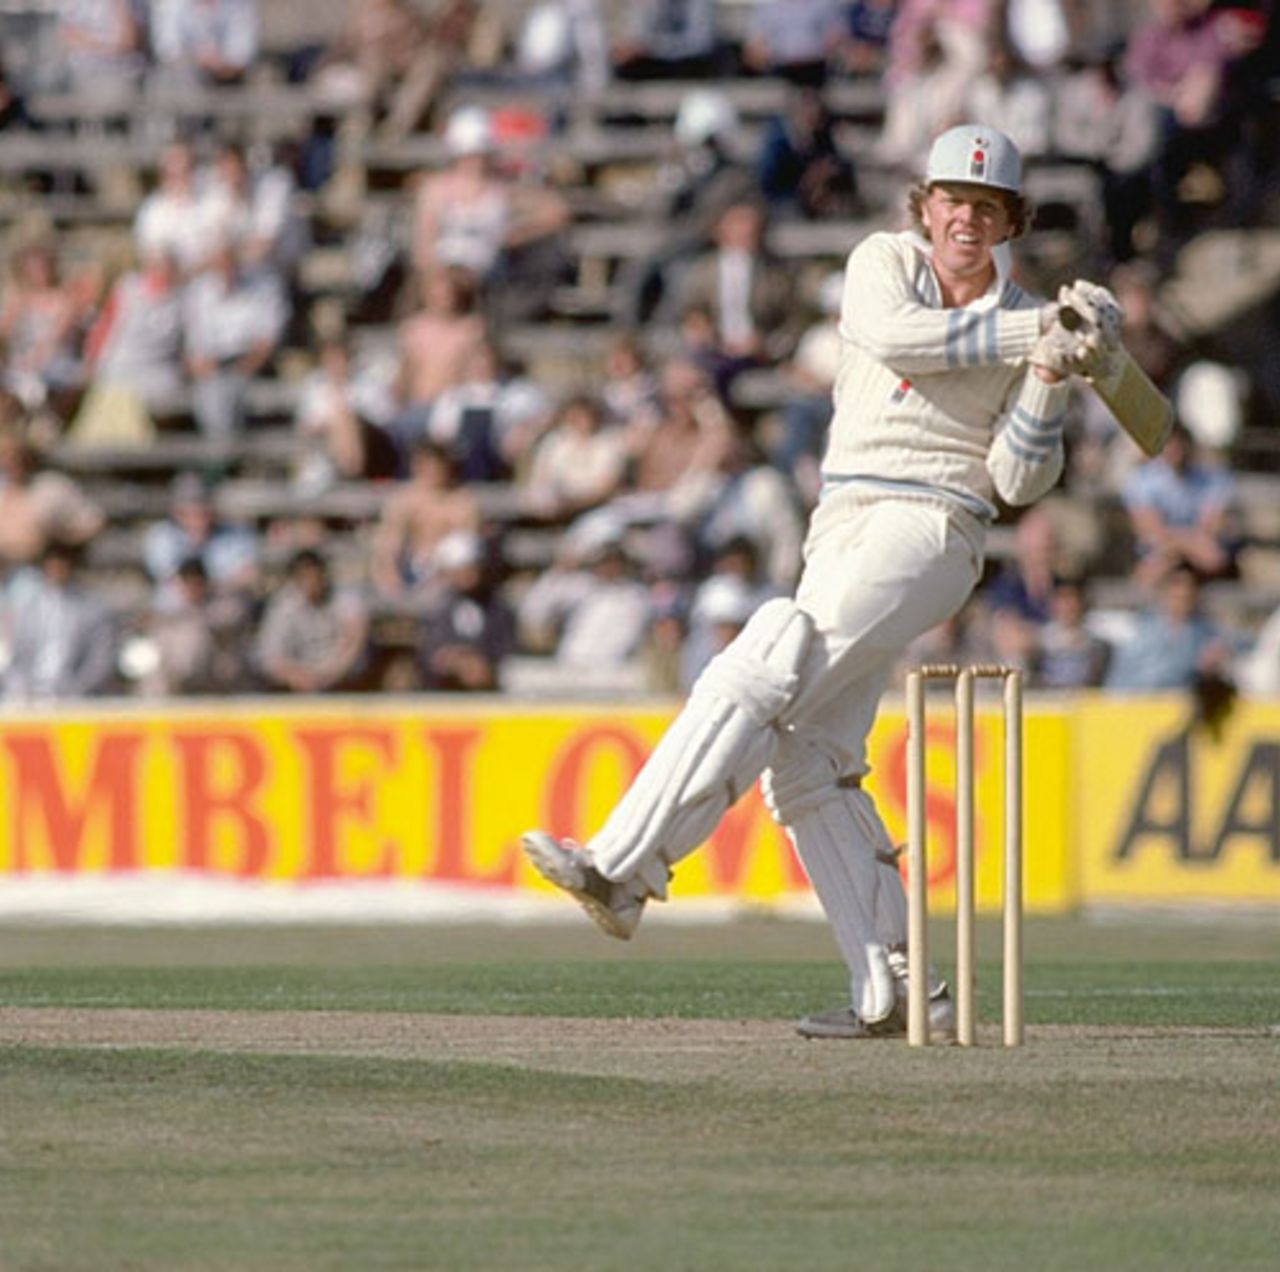 Barry Richards bats during the Courage Challenge cup, The Oval, London, September 1979